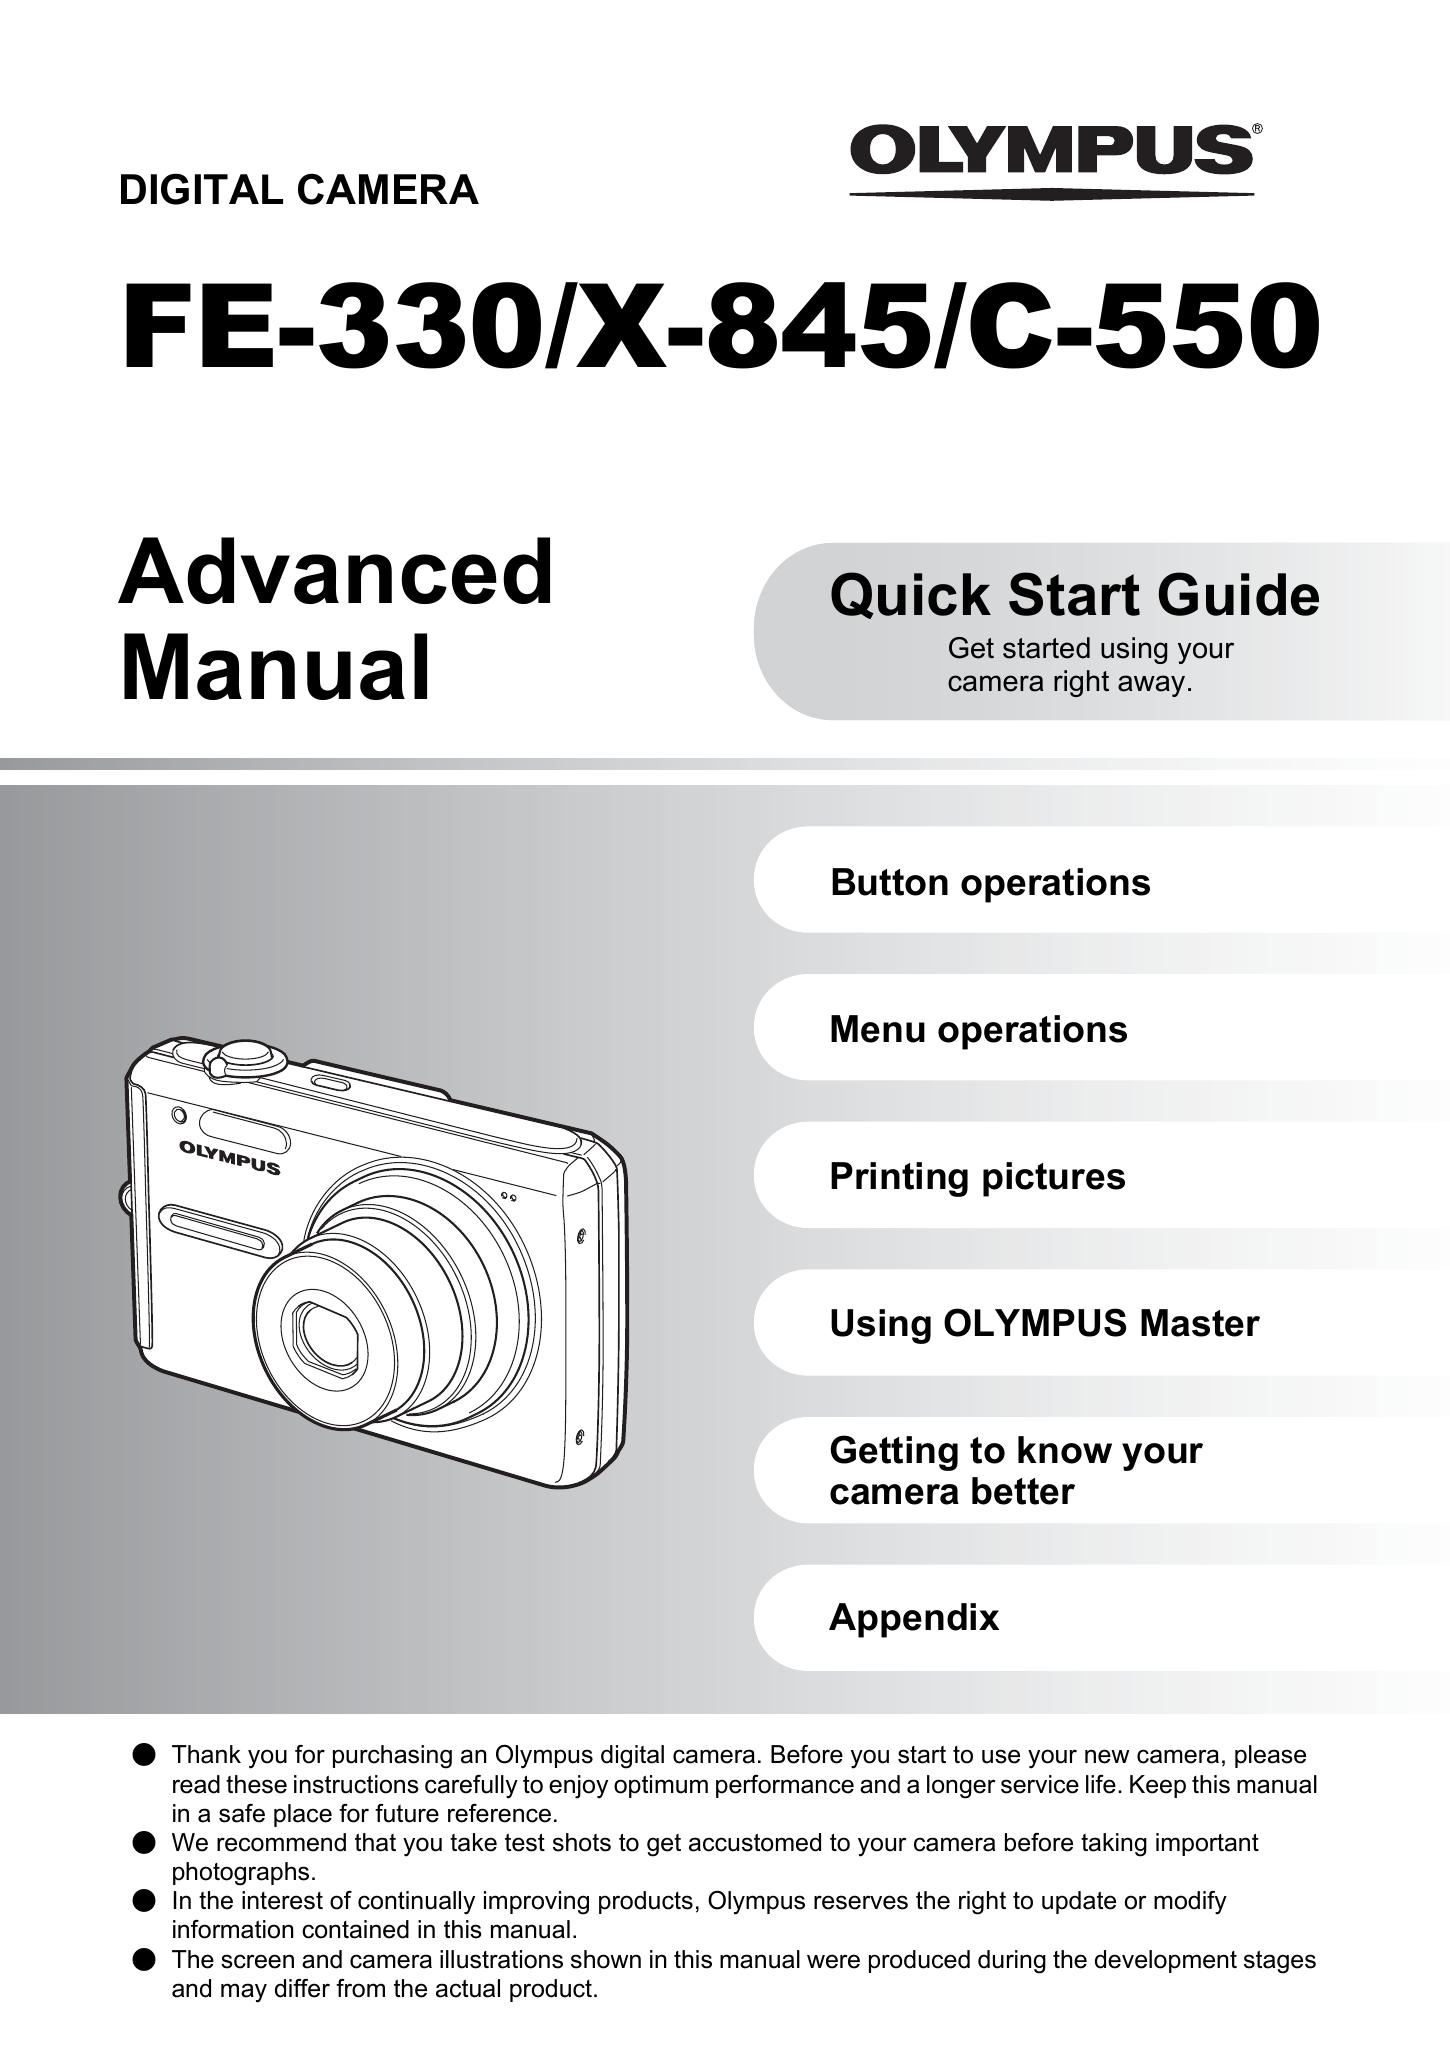 Olympus FE-330 Camcorder Accessories User Manual